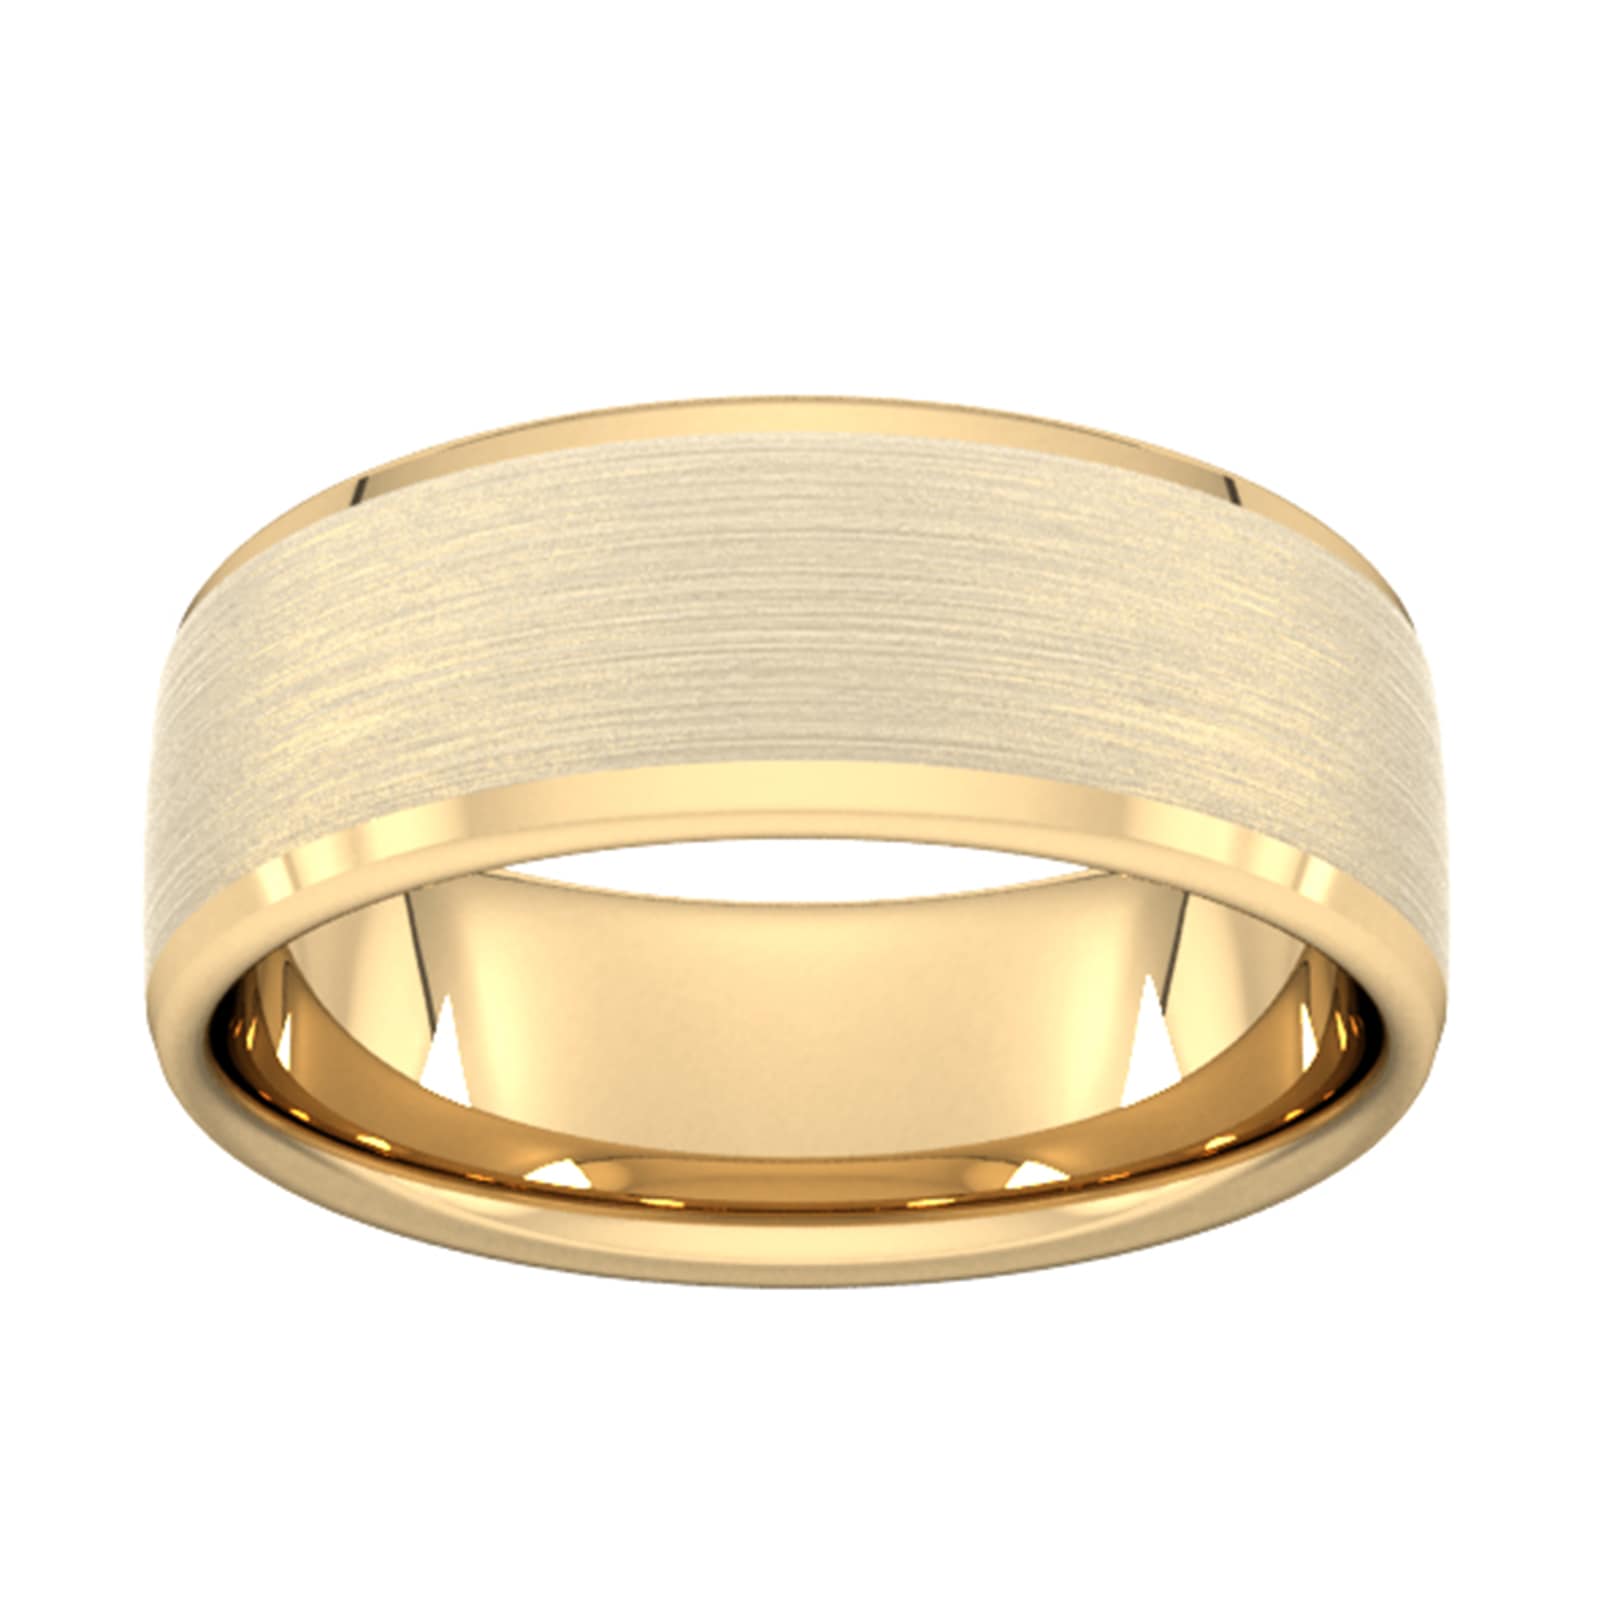 8mm Slight Court Extra Heavy Polished Chamfered Edges With Matt Centre Wedding Ring In 18 Carat Yellow Gold - Ring Size Z